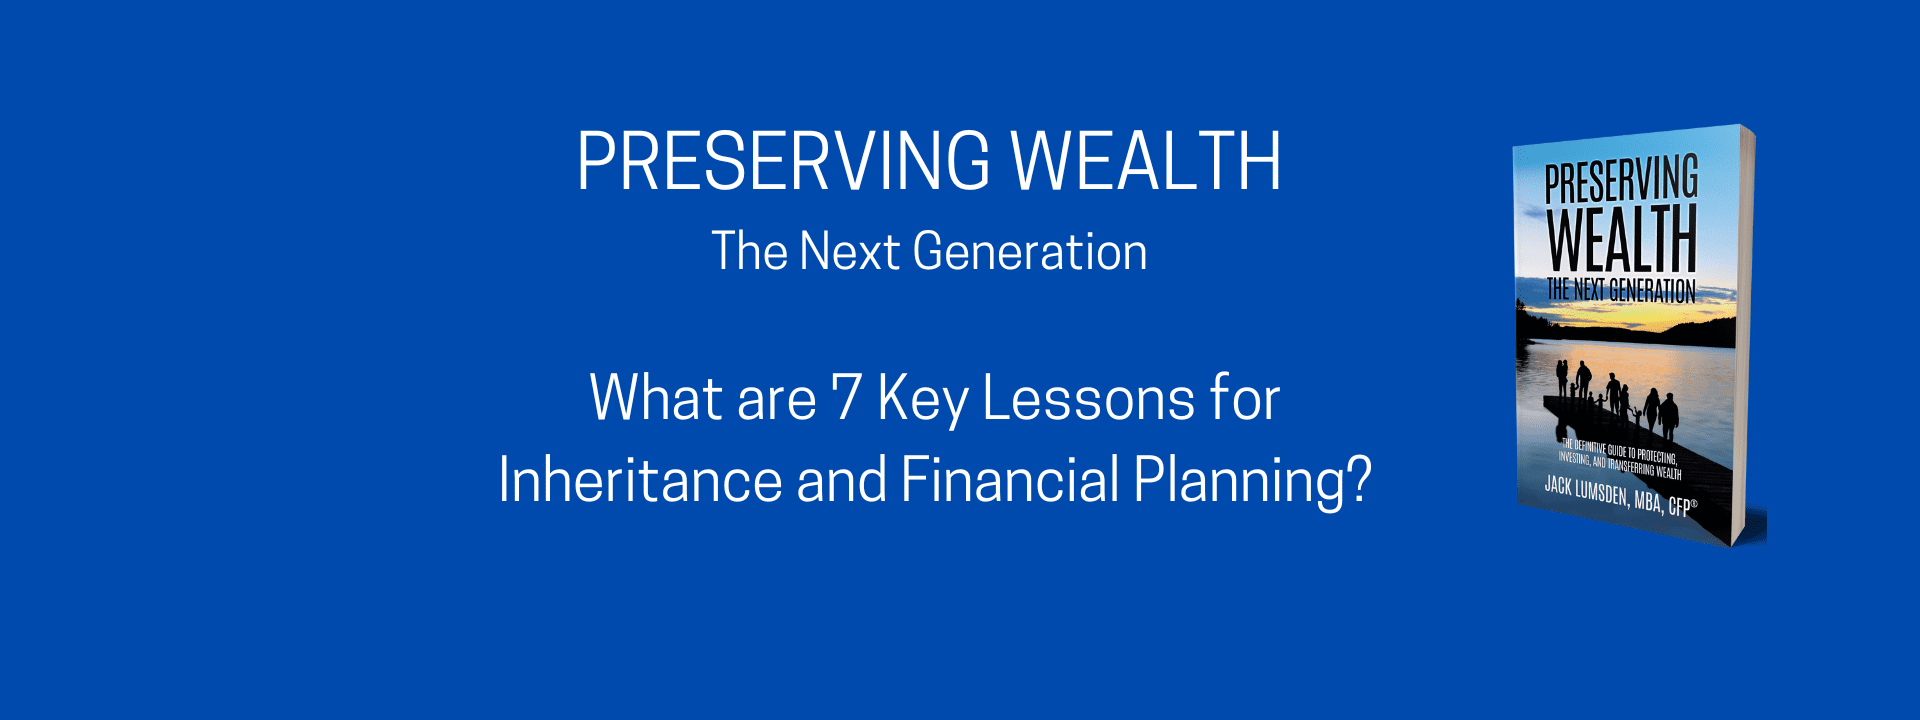 Key Lessons for Inheritance and Financial Planning